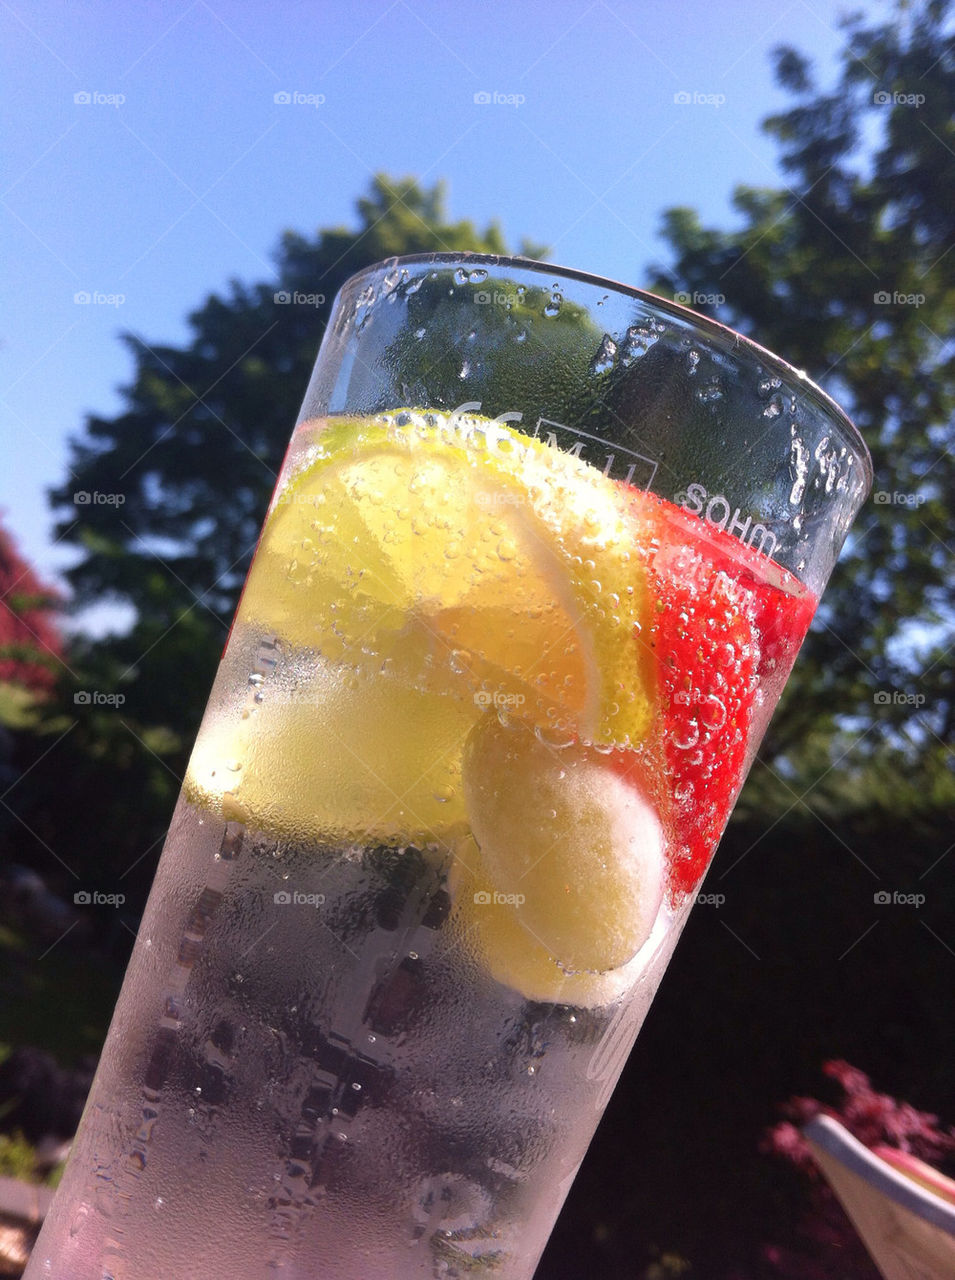 outdoors summer drink fruit by sarah_robbo